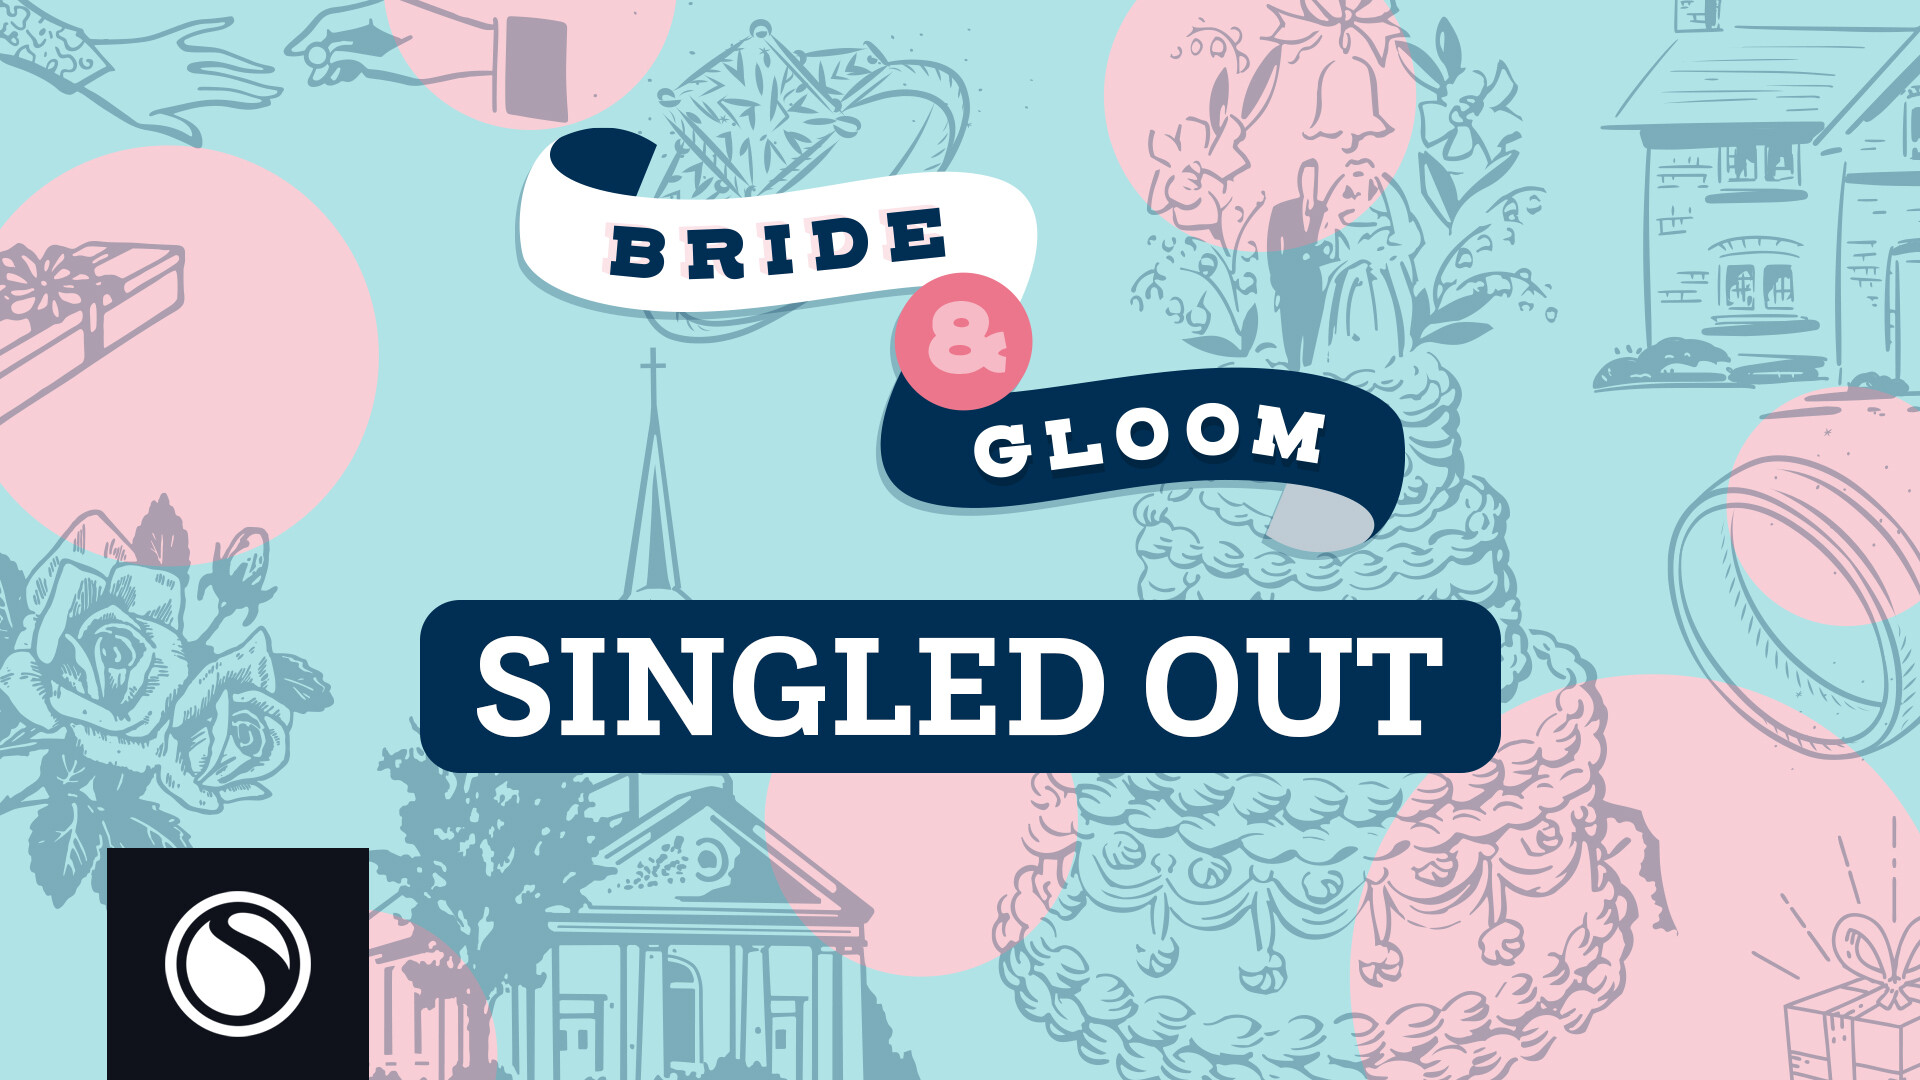 Watch Bride & Gloom - Singled Out